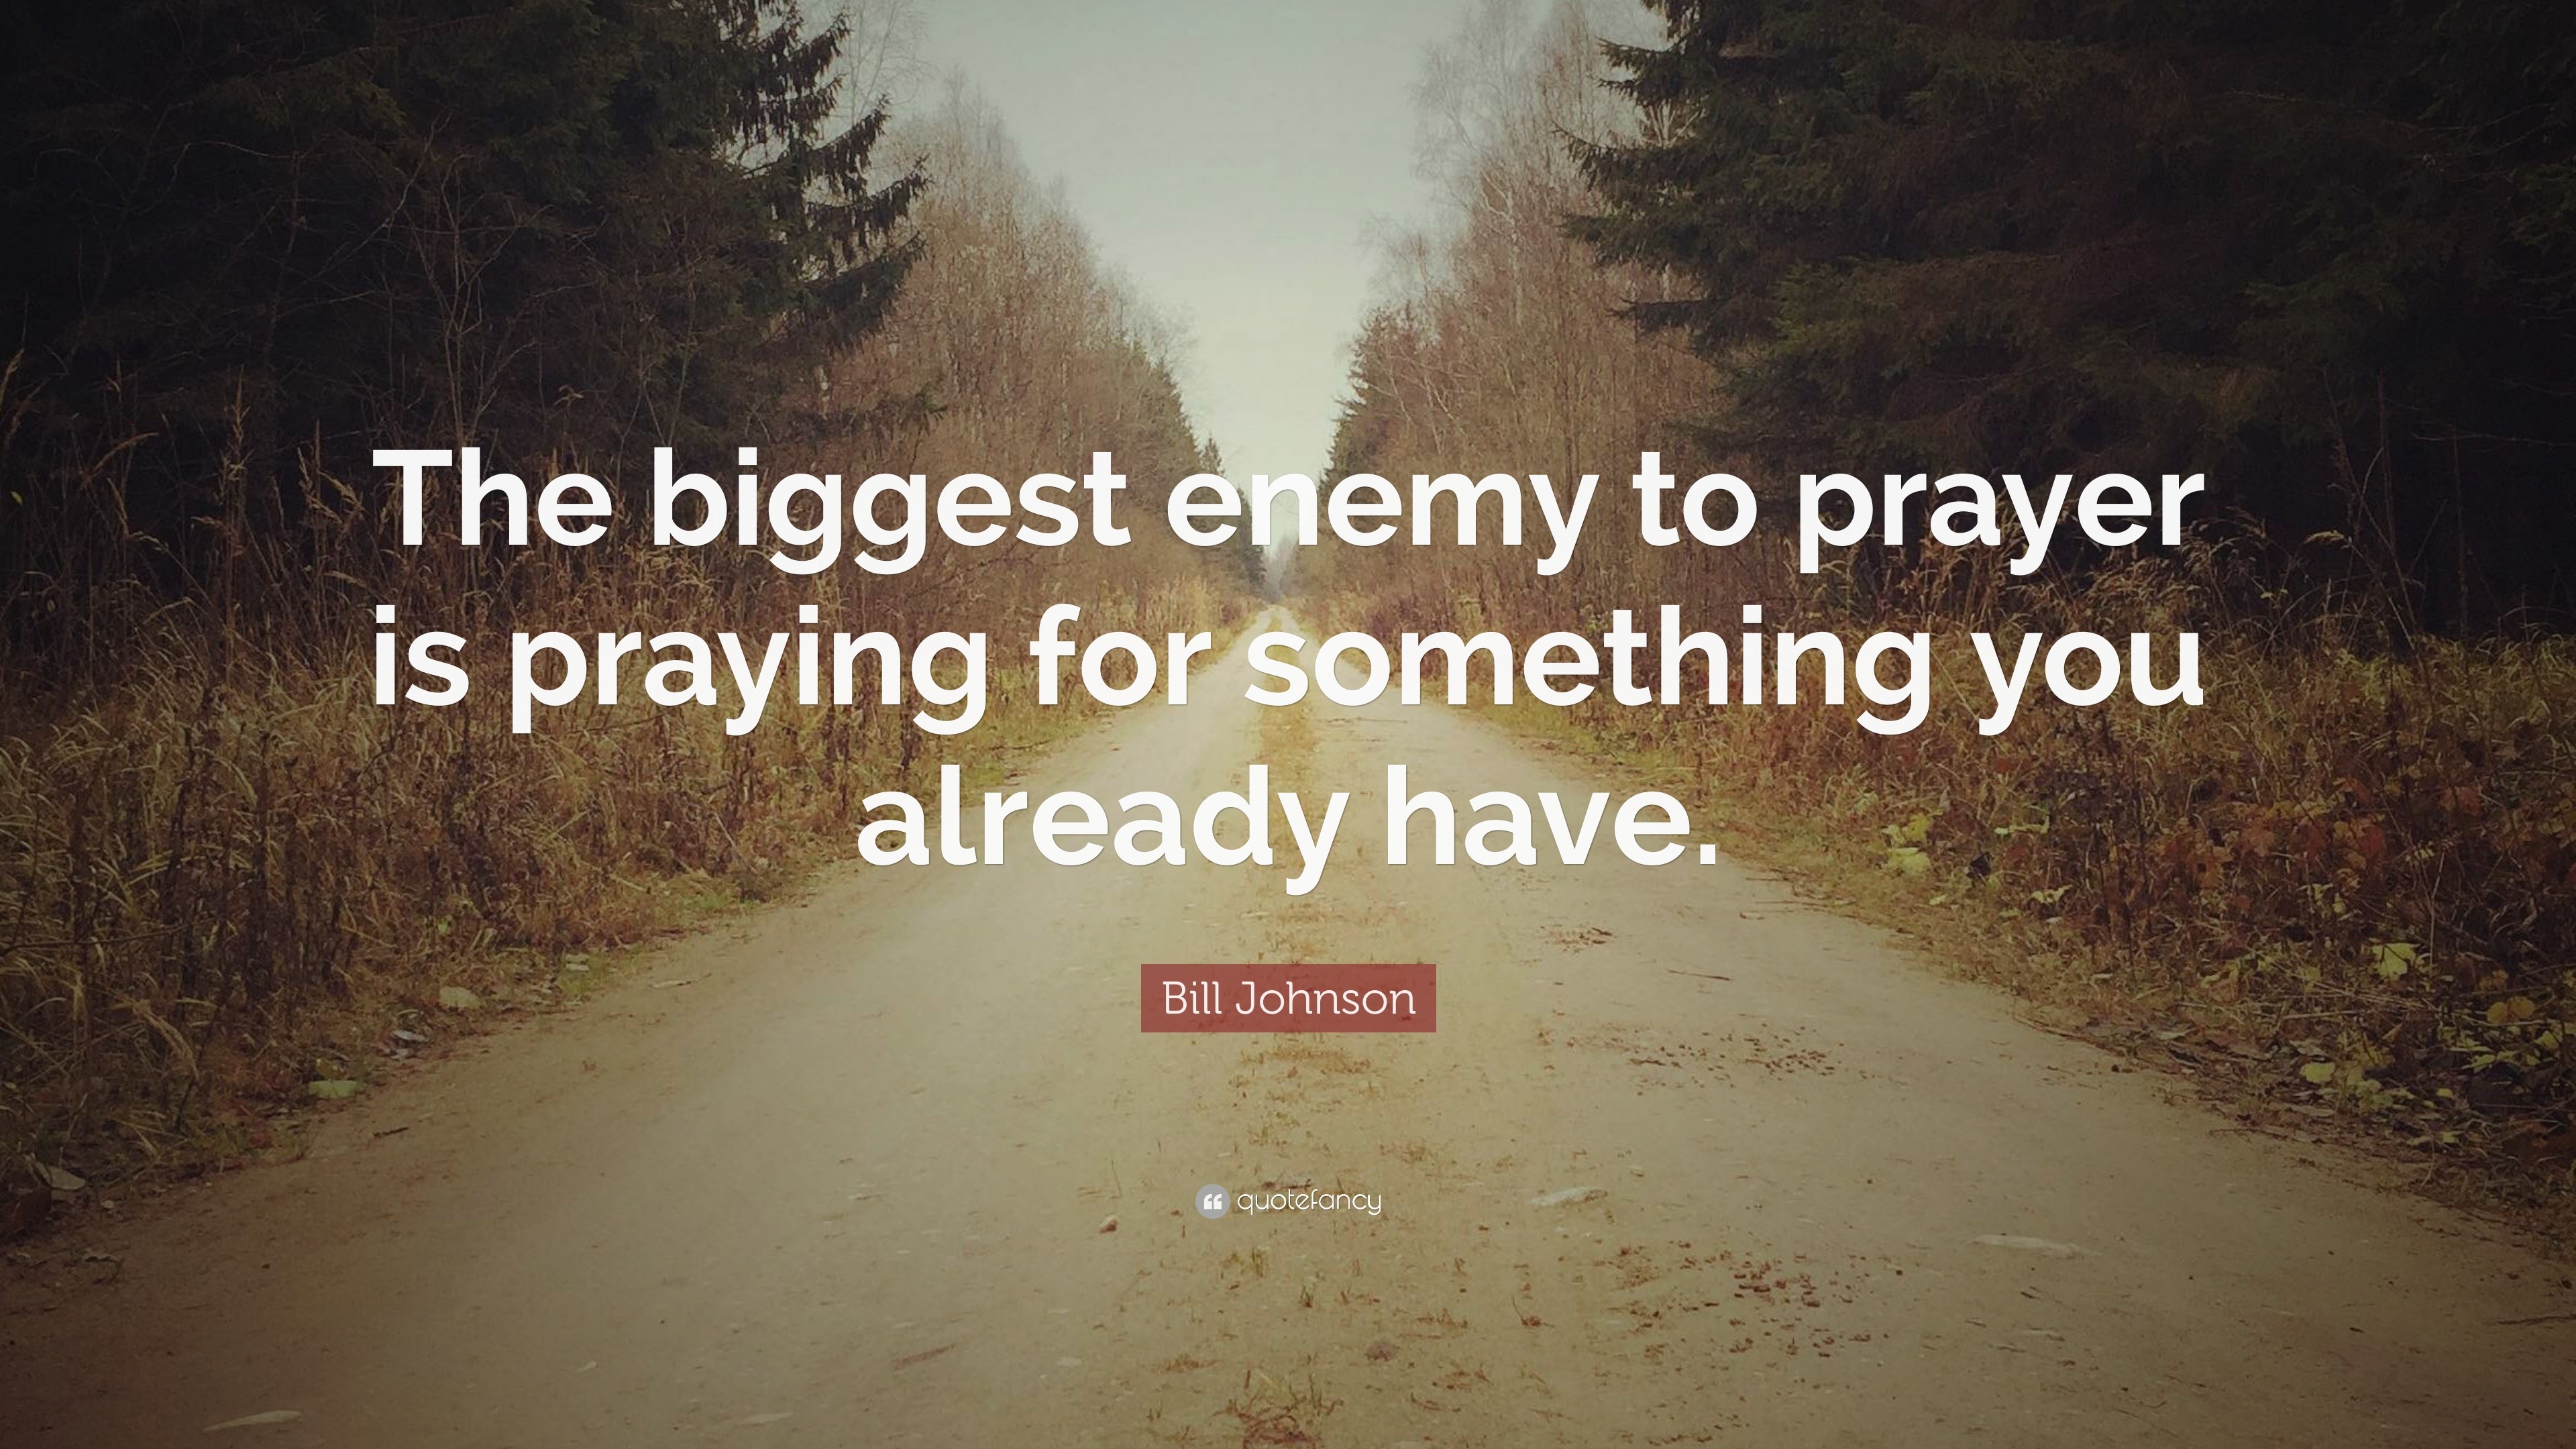 Bill Johnson Quote: “The biggest enemy to prayer is praying for ...